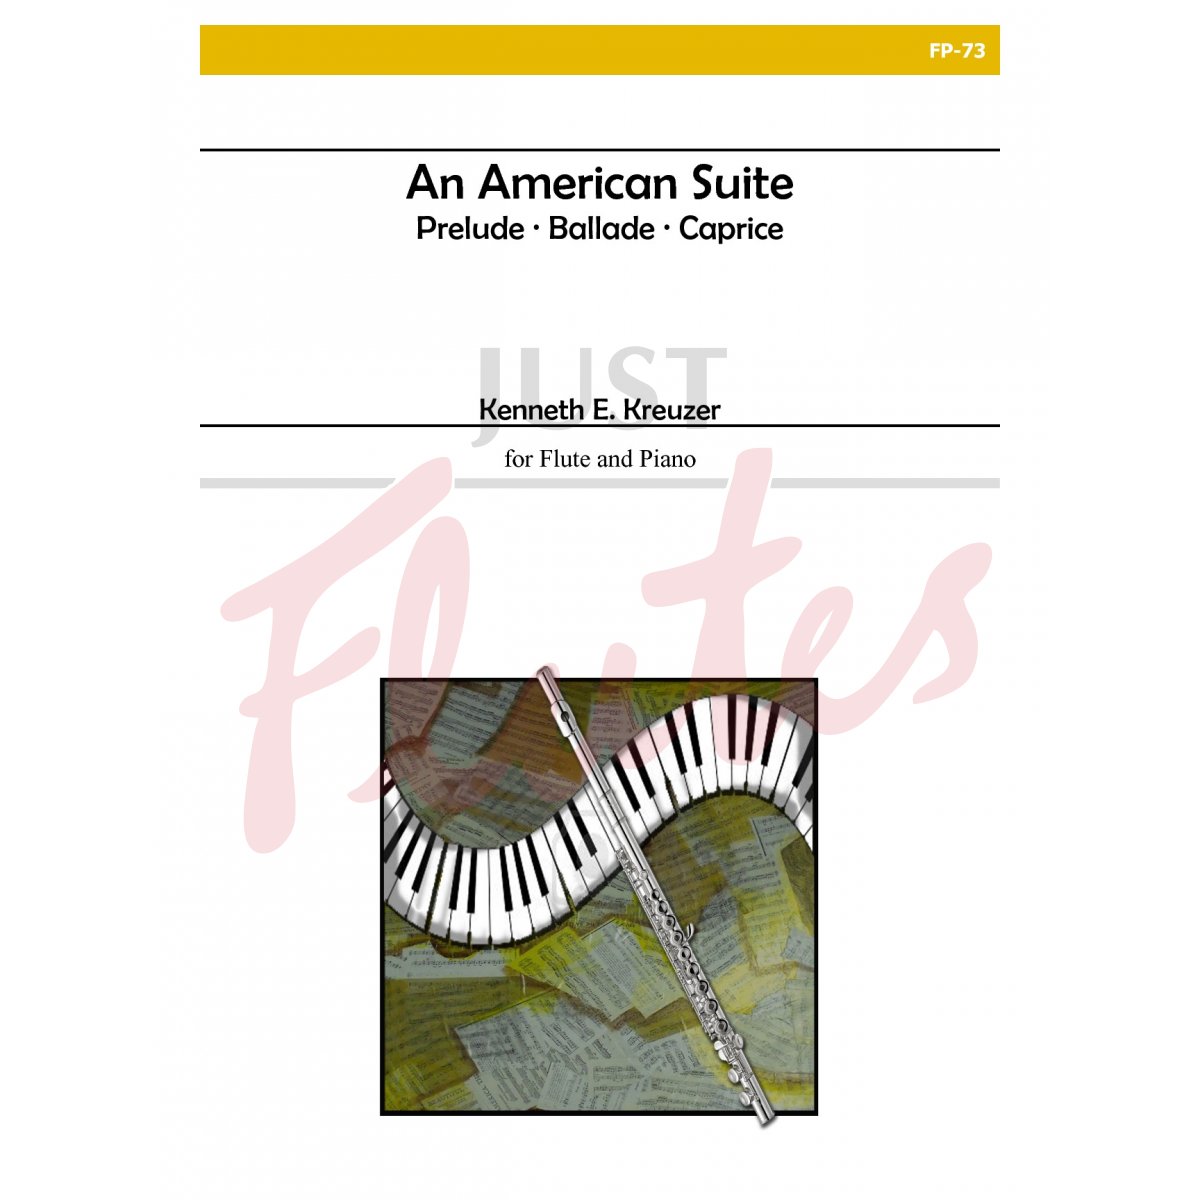 An American Suite